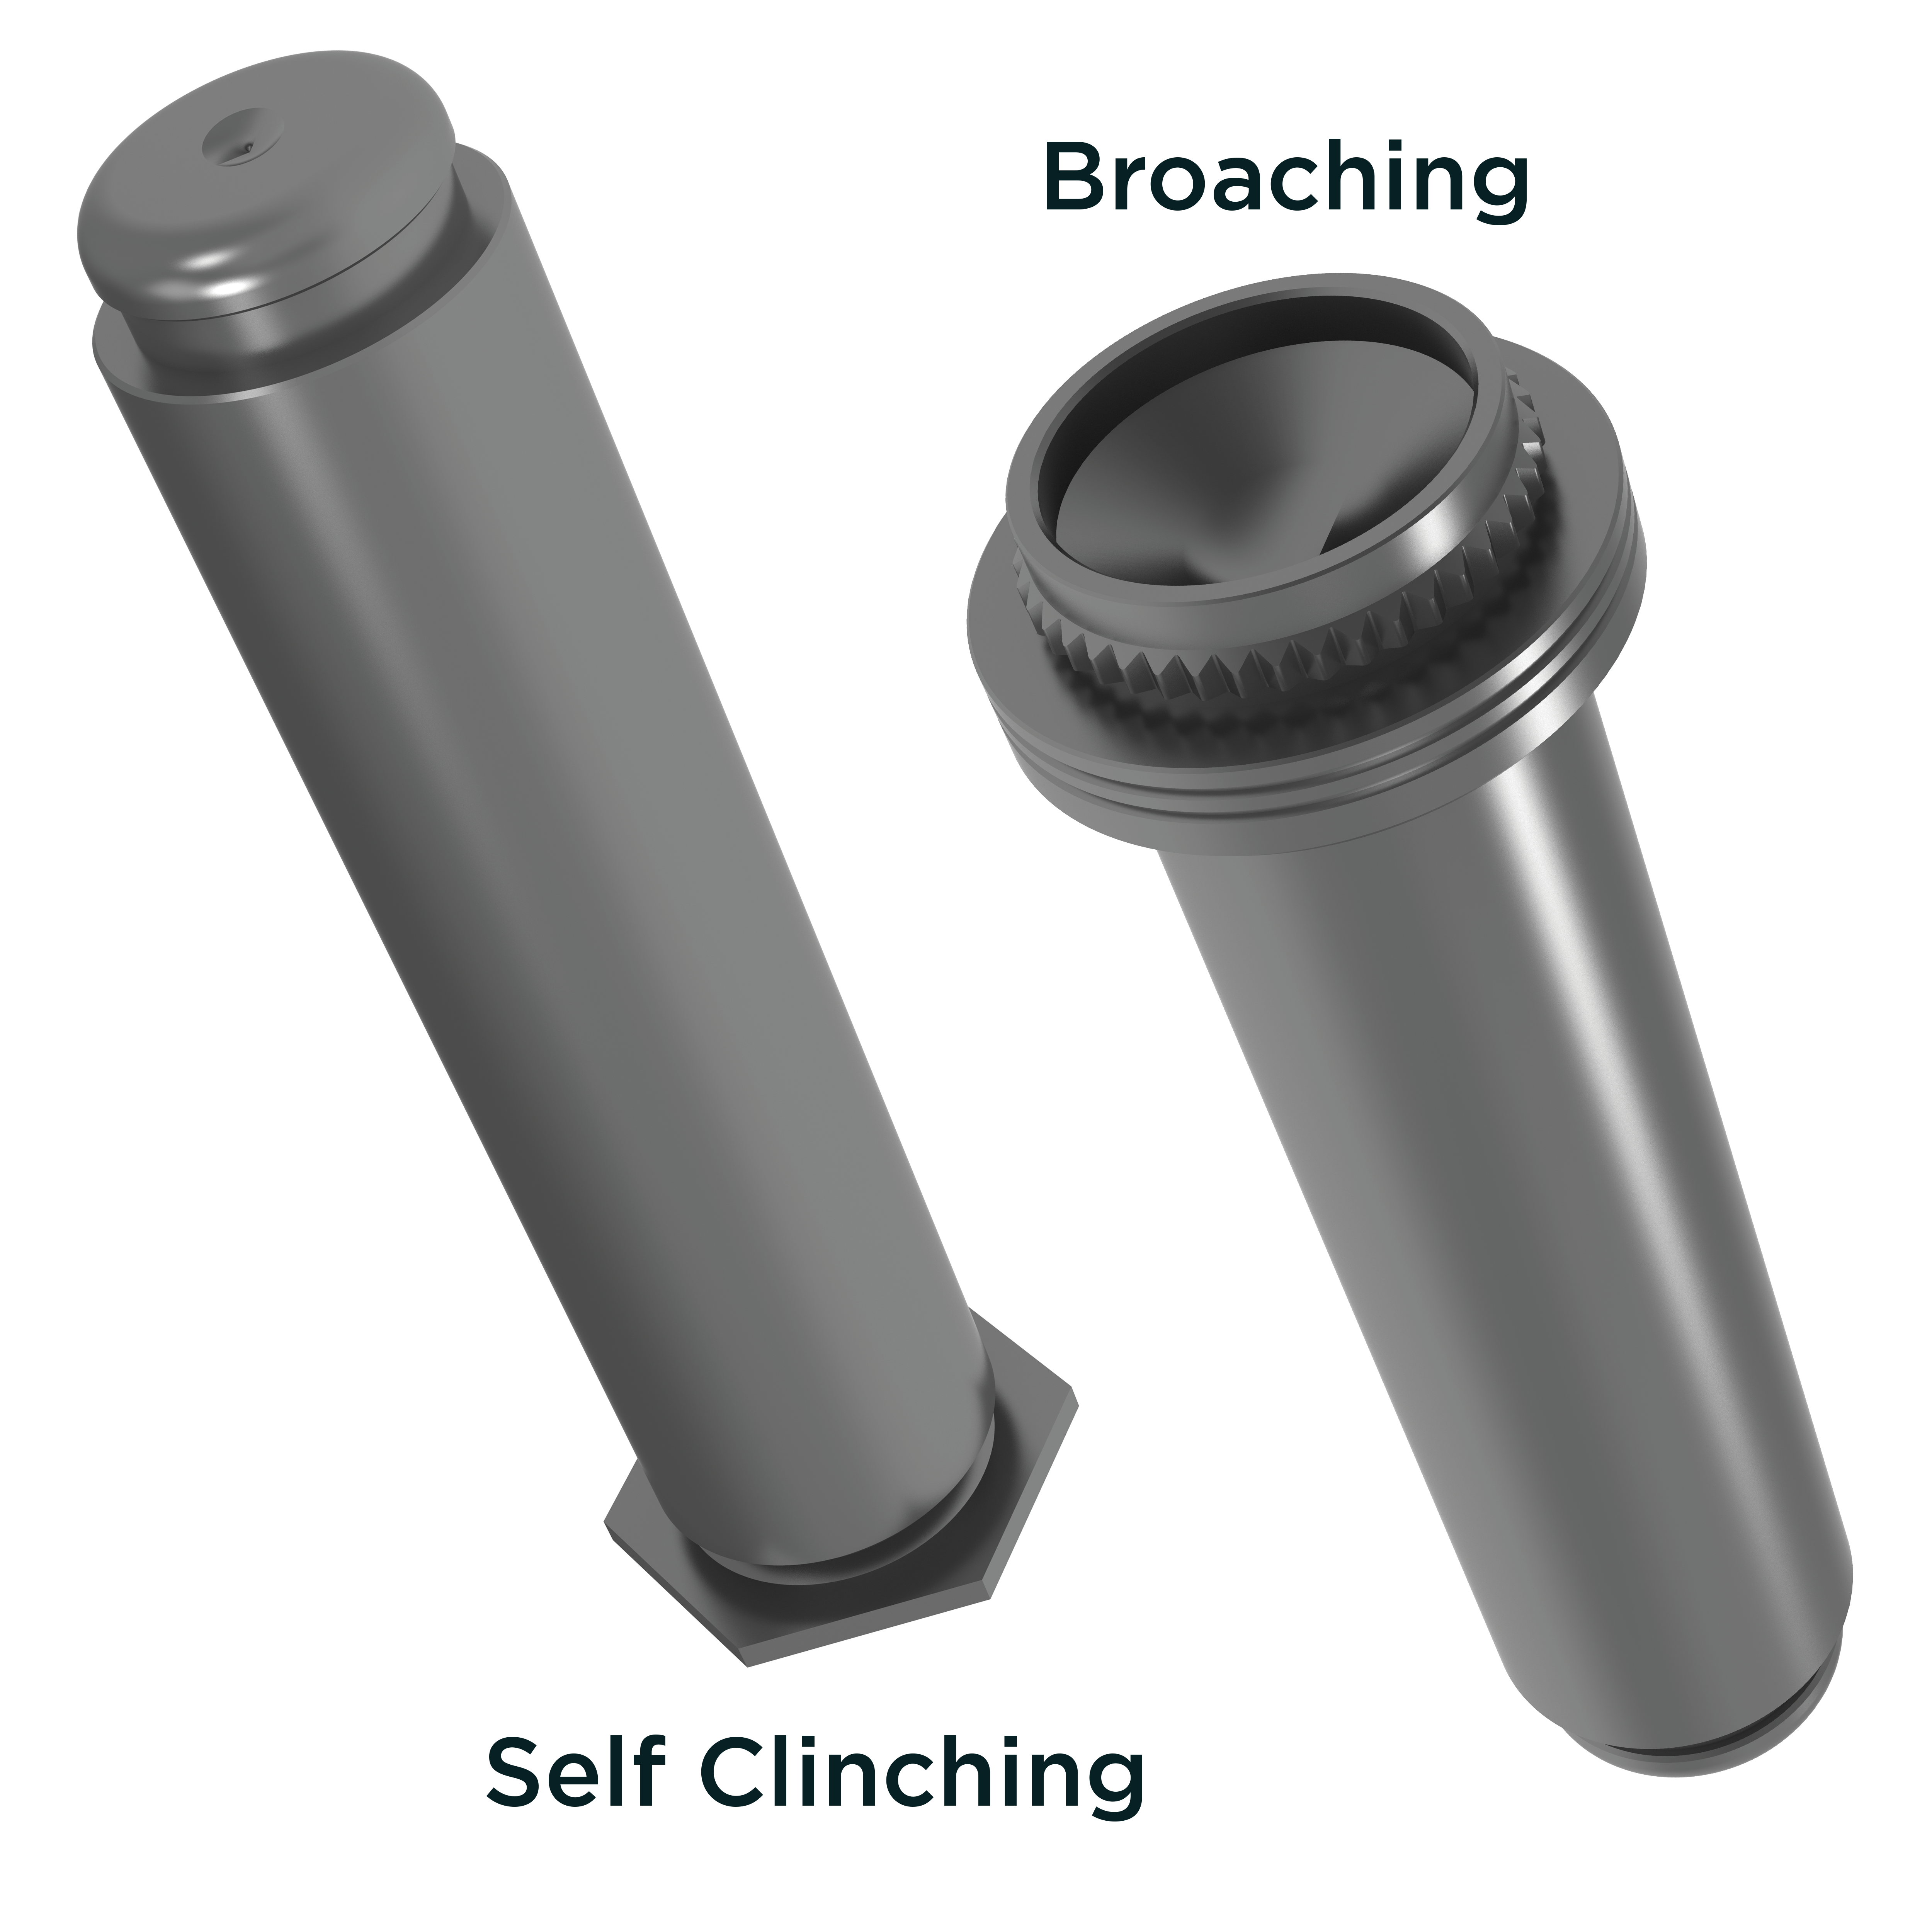 Self-clinching and broaching pins for electrical connections